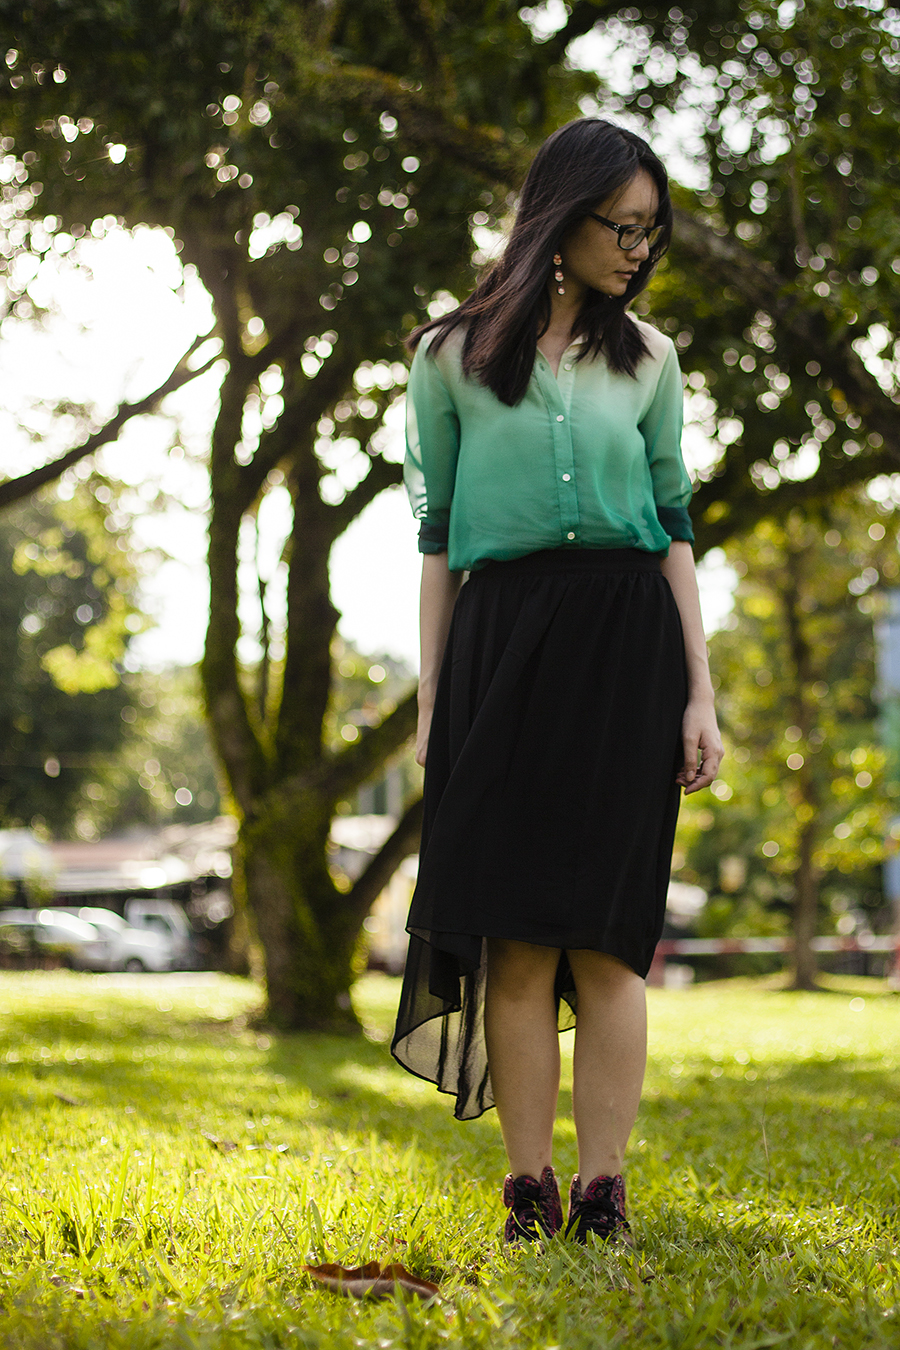 Gradient green chiffon shirt from Romwe, black chiffon skirt from Forever 21, black frame glasses from Gap, red high top sneakers from Puma x McQ via Shopbop, red matryoshka earrings.